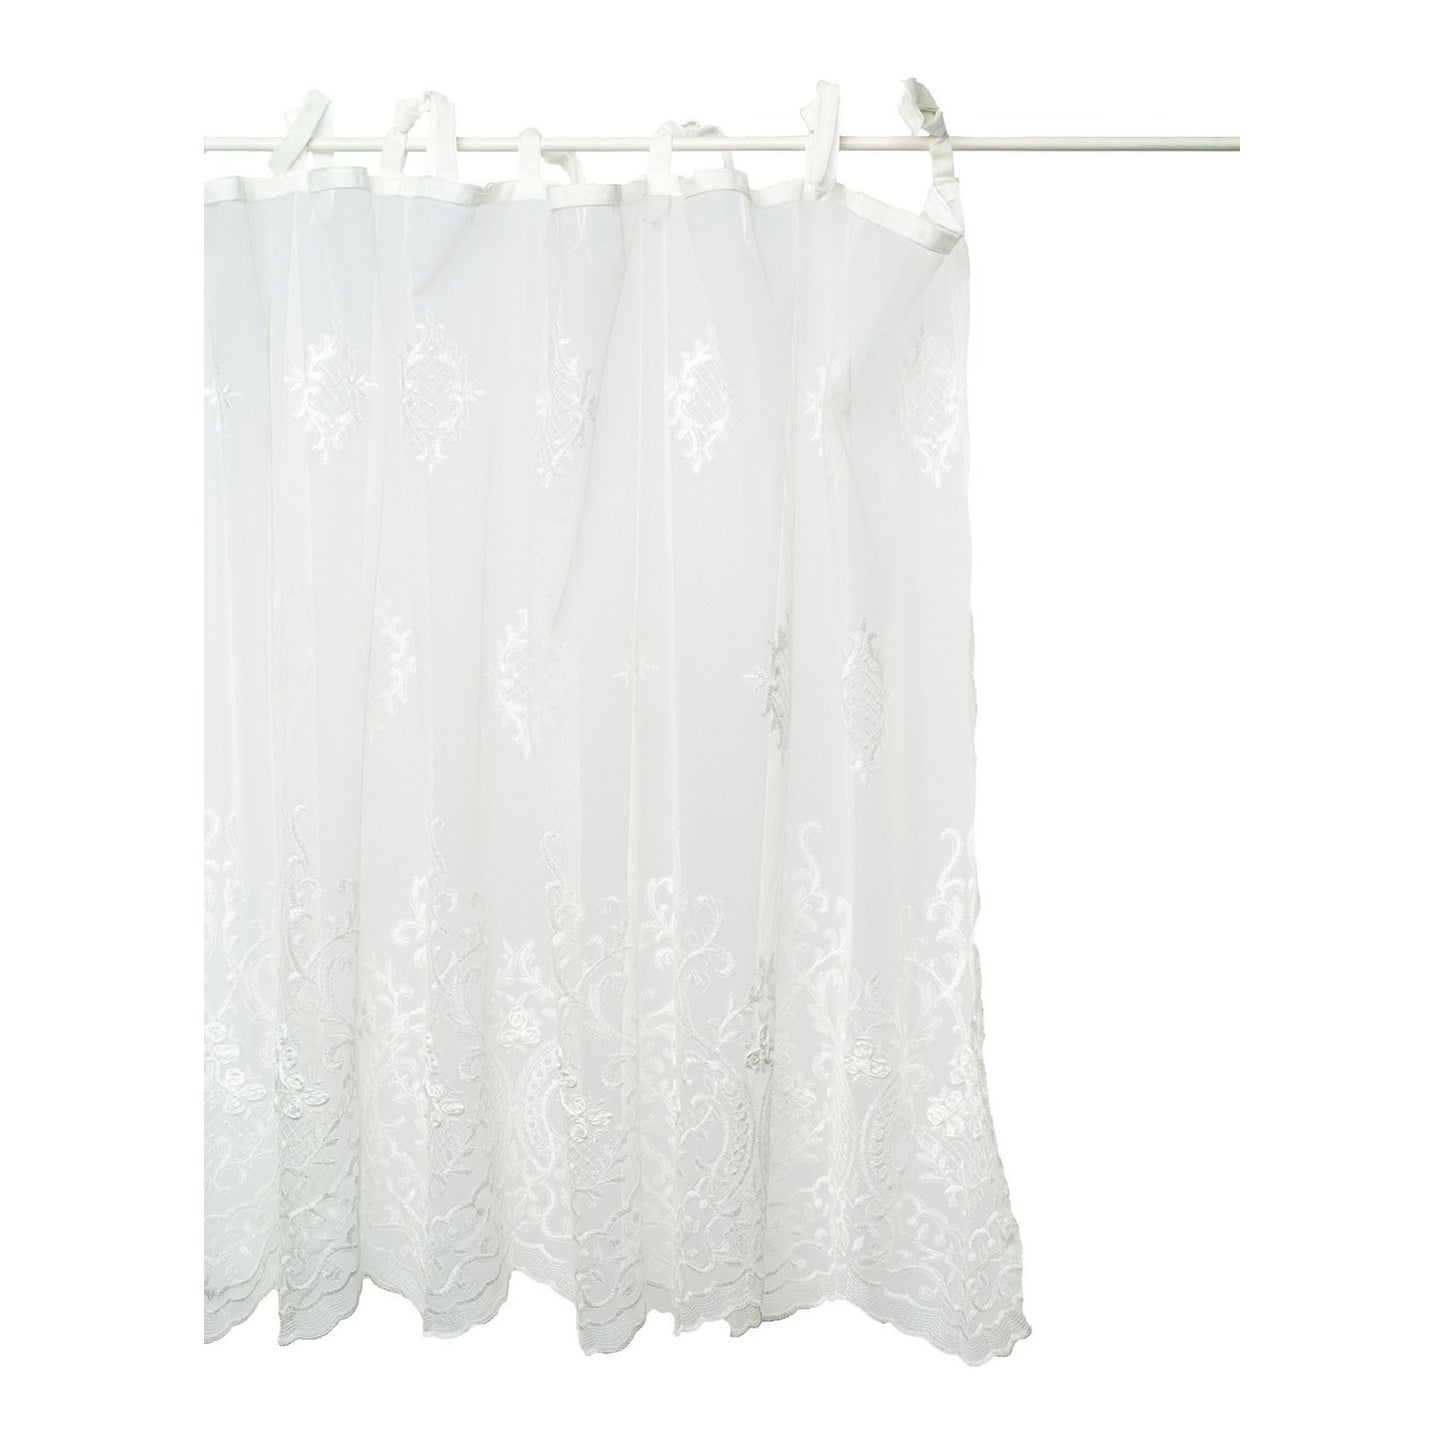 Opulent lace drapery for sophisticated interiors.